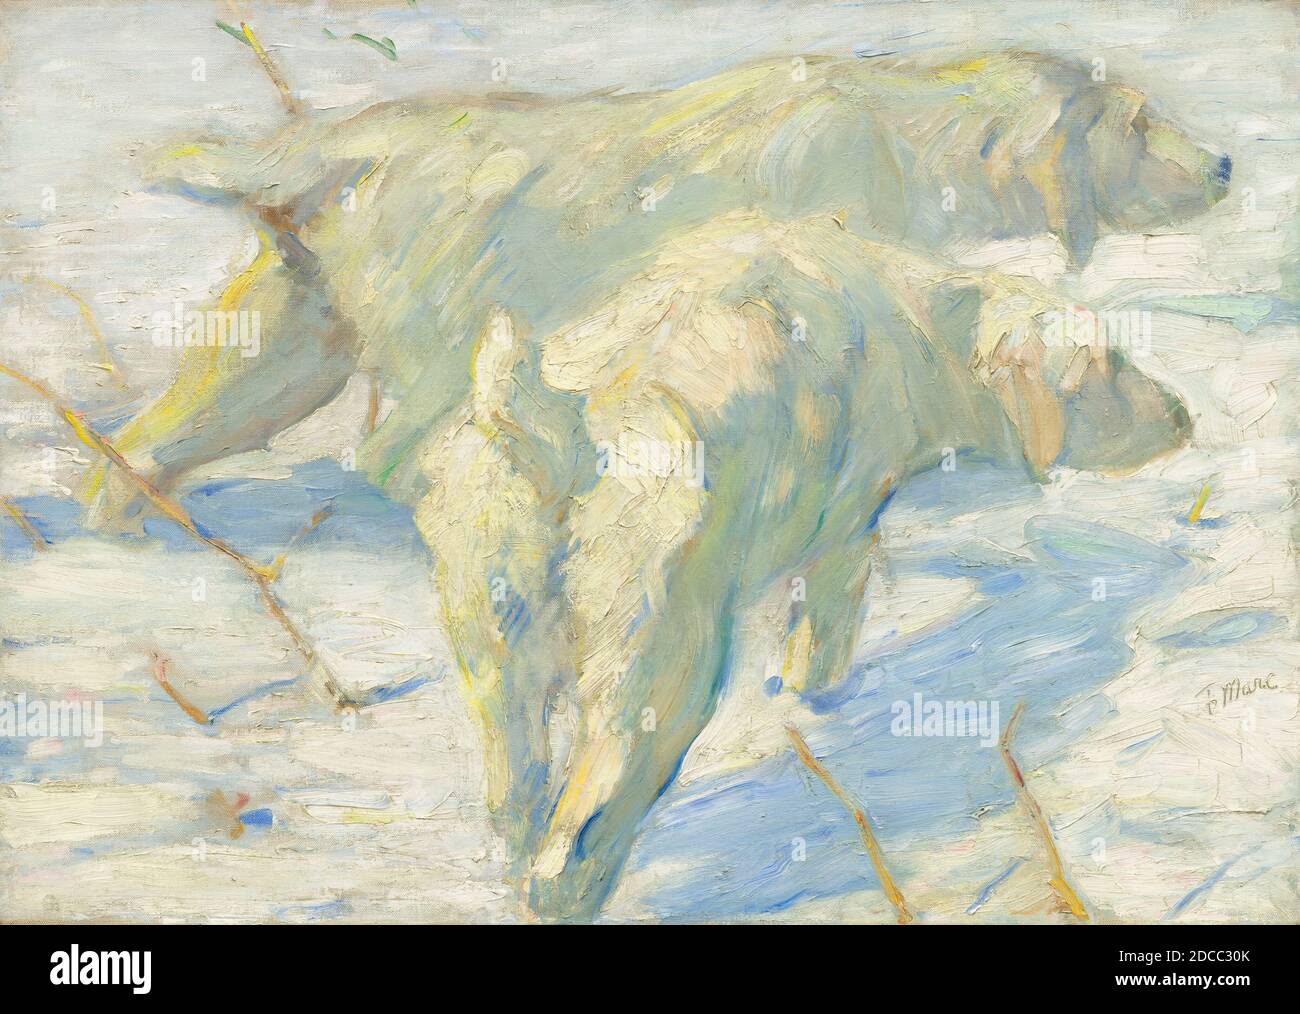 Franz Marc, (artist), German, 1880 - 1916, Siberian Dogs in the Snow, 1909/1910, oil on canvas, overall: 80.5 x 114 cm (31 11/16 x 44 7/8 in.), framed: 97.8 x 131.4 cm (38 1/2 x 51 3/4 in Stock Photo